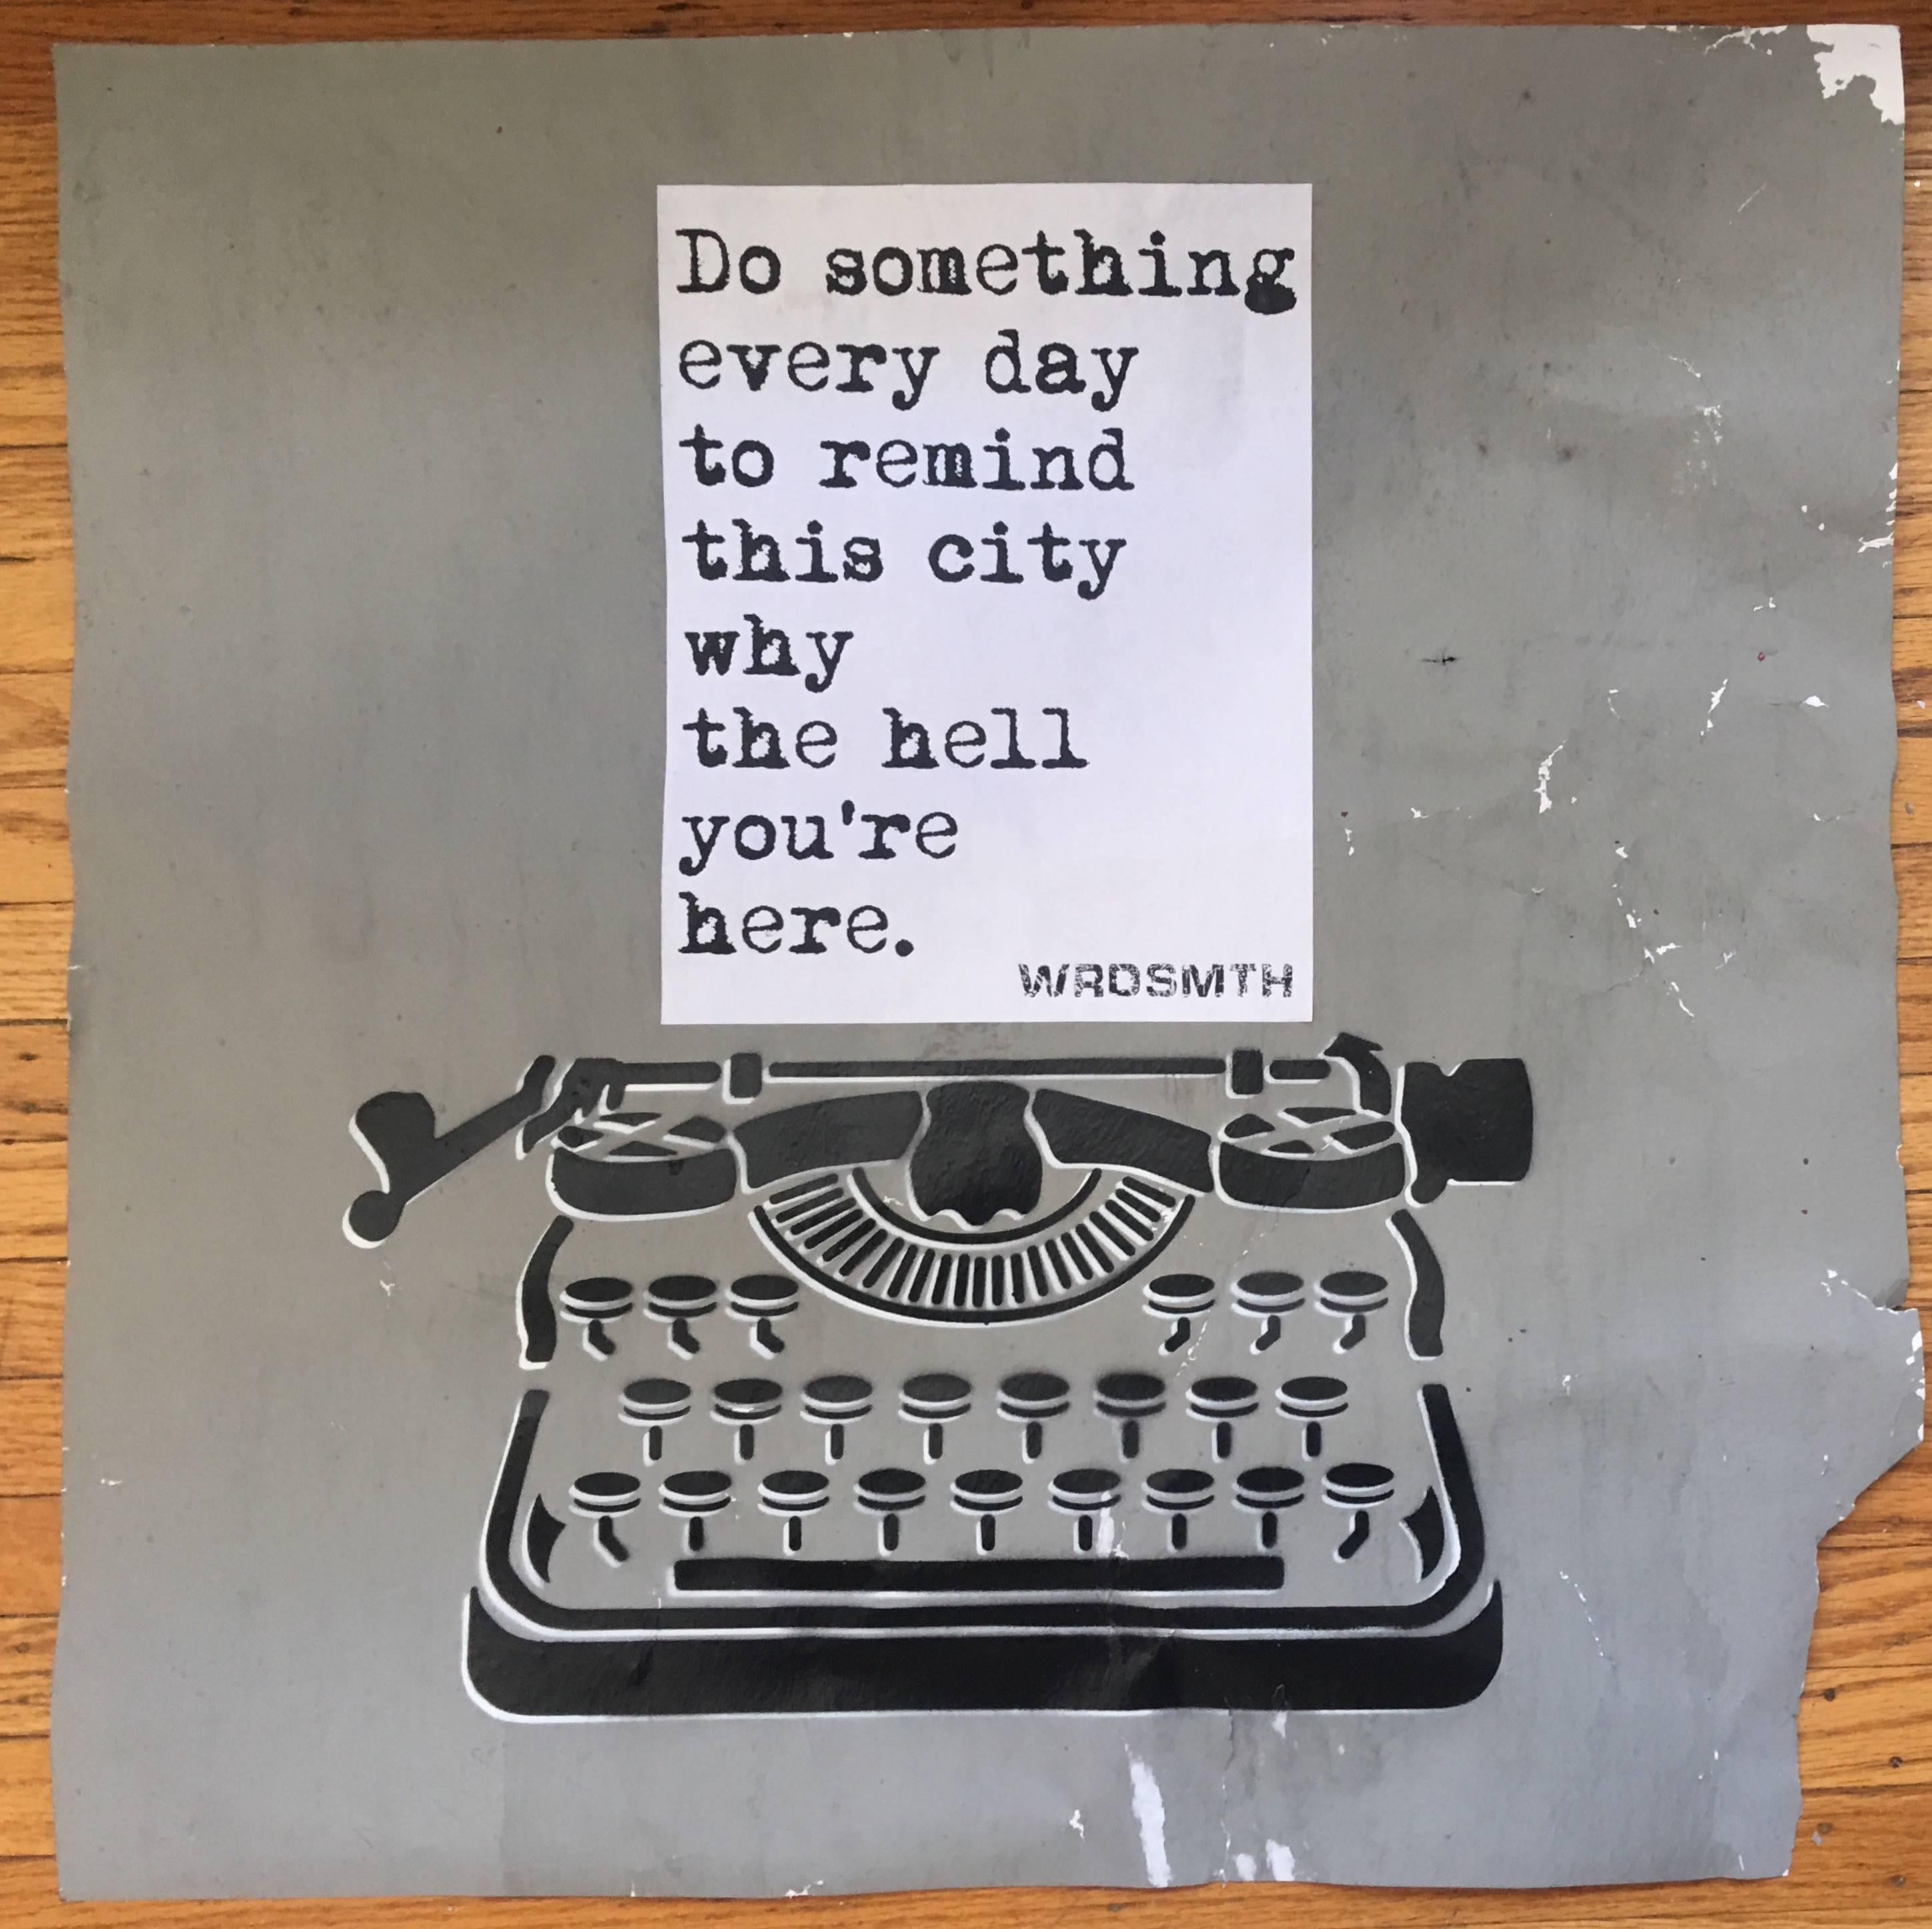 Do Something - Mixed Media Art by WRDSMTH